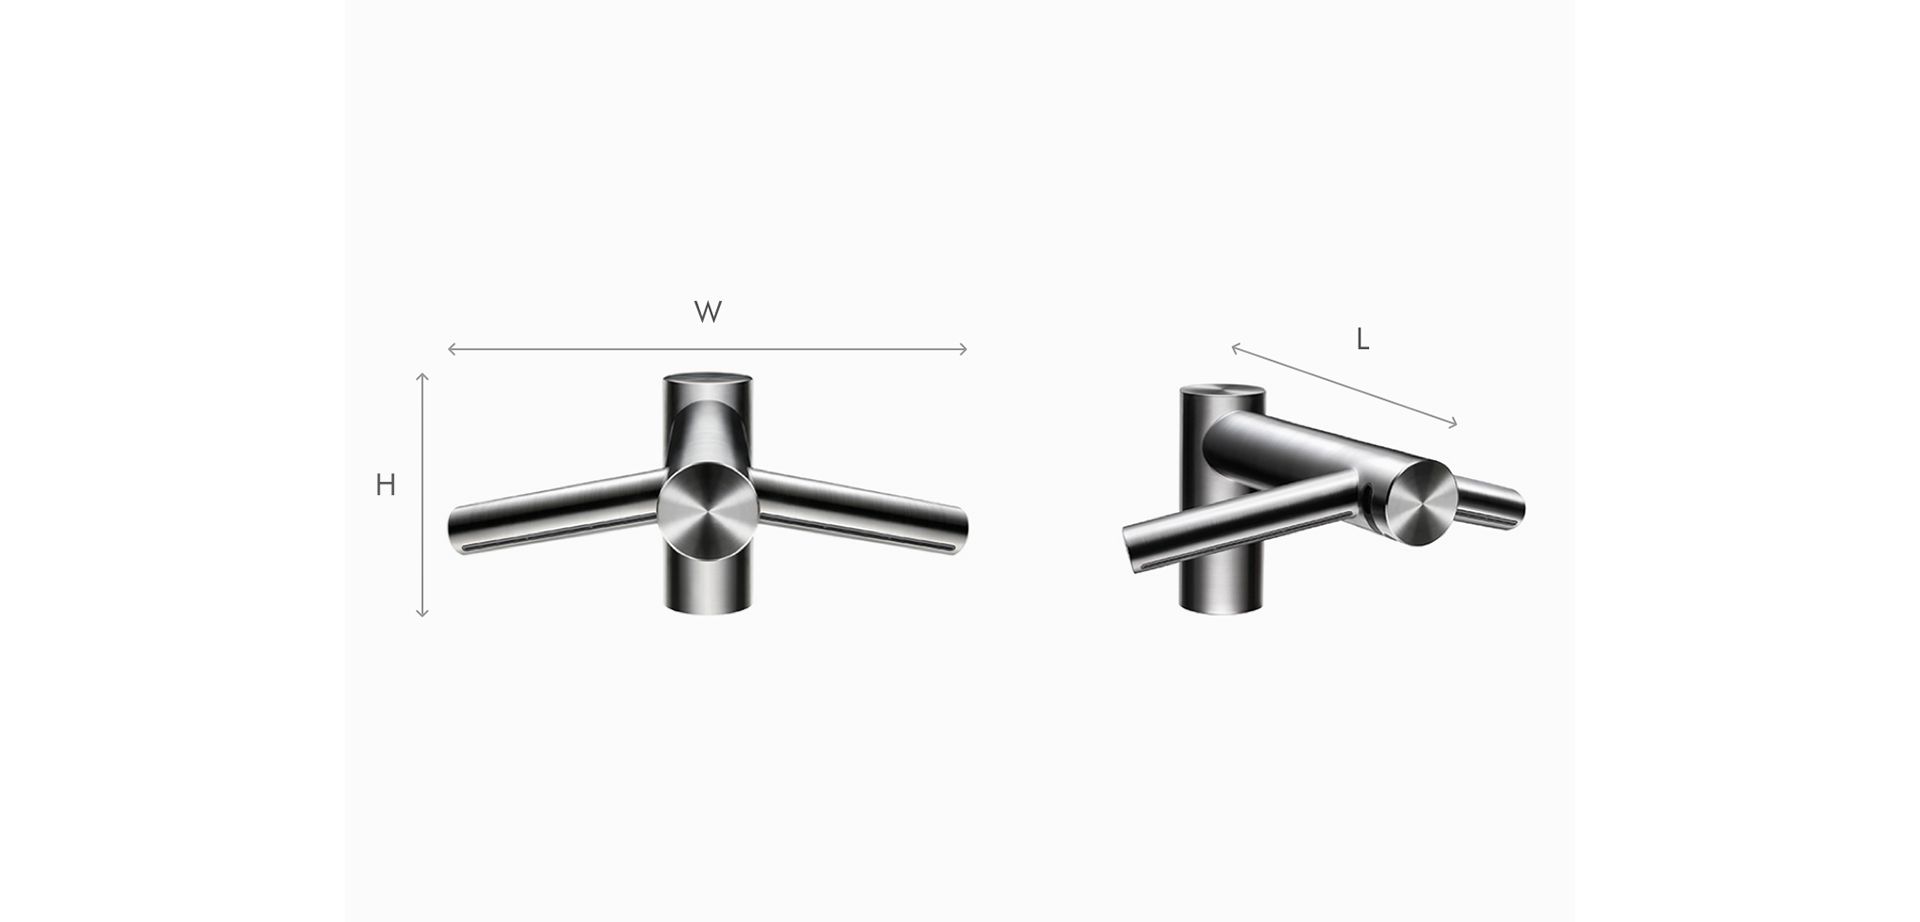 Illustration of Dyson Airblade Wash+Dry short hand dryer dimensions